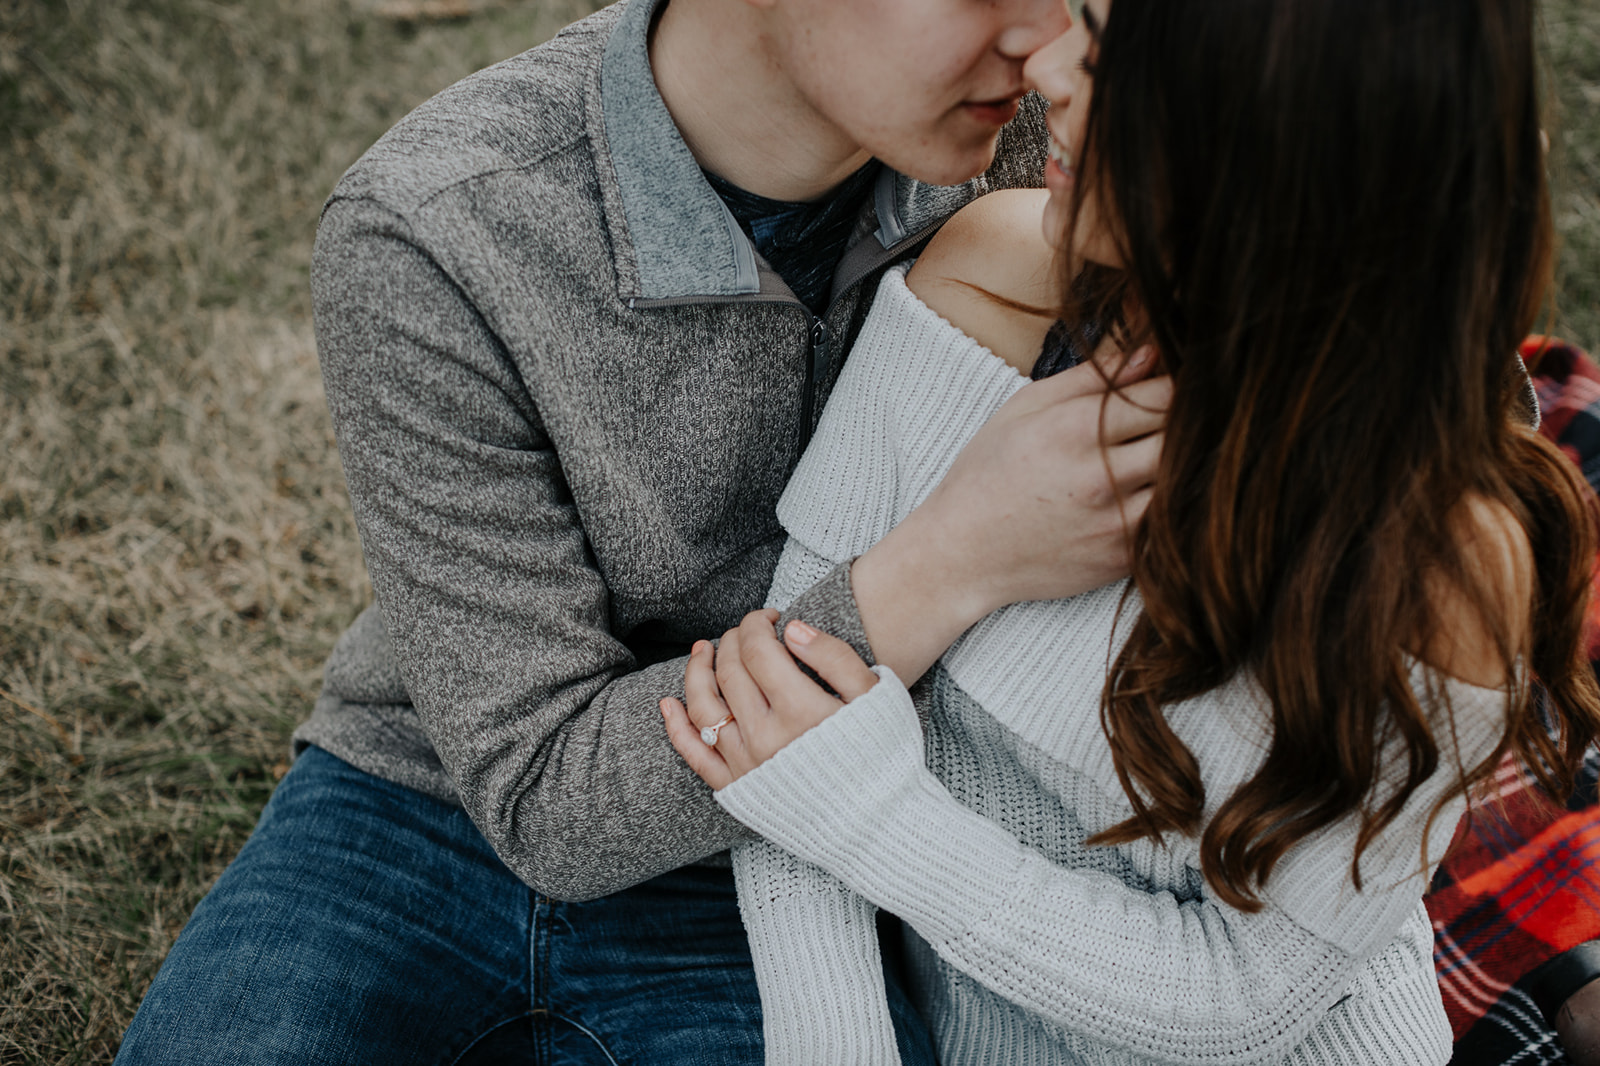 5 tips to nail your engagement session including outdoor posing ideas, what to wear to an engagement session and location tips by Abigail Maki, Jamestown North Dakota photographer